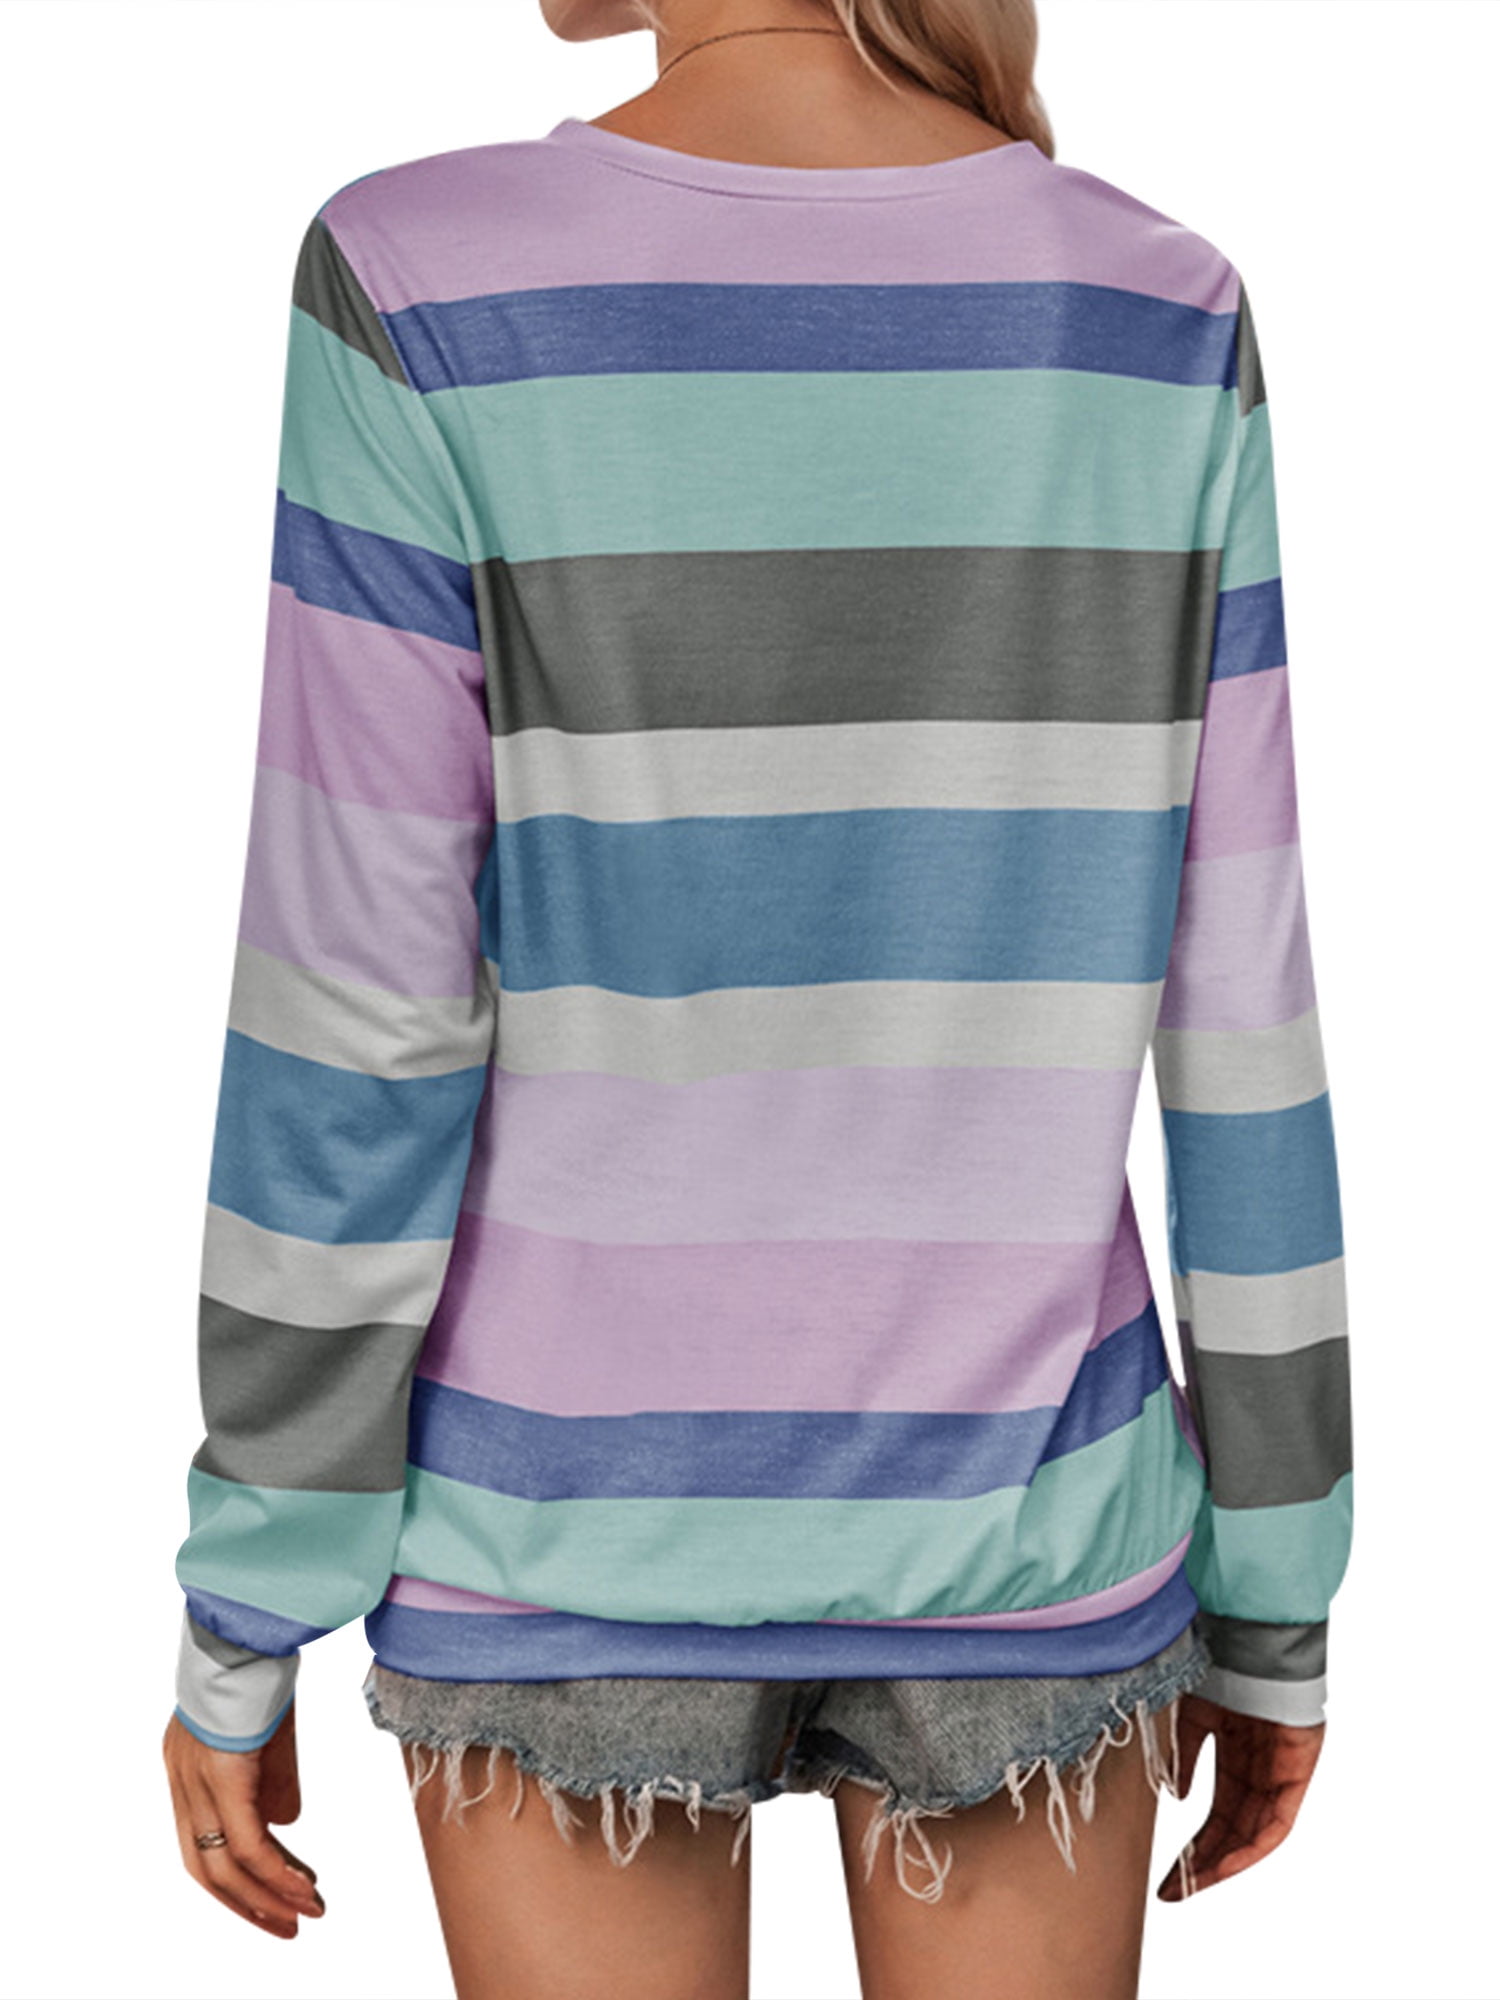 HUBERY Women Multicolor Striped Contrast Color Round Neck Long Sleeve T- Shirt - Walmart.com